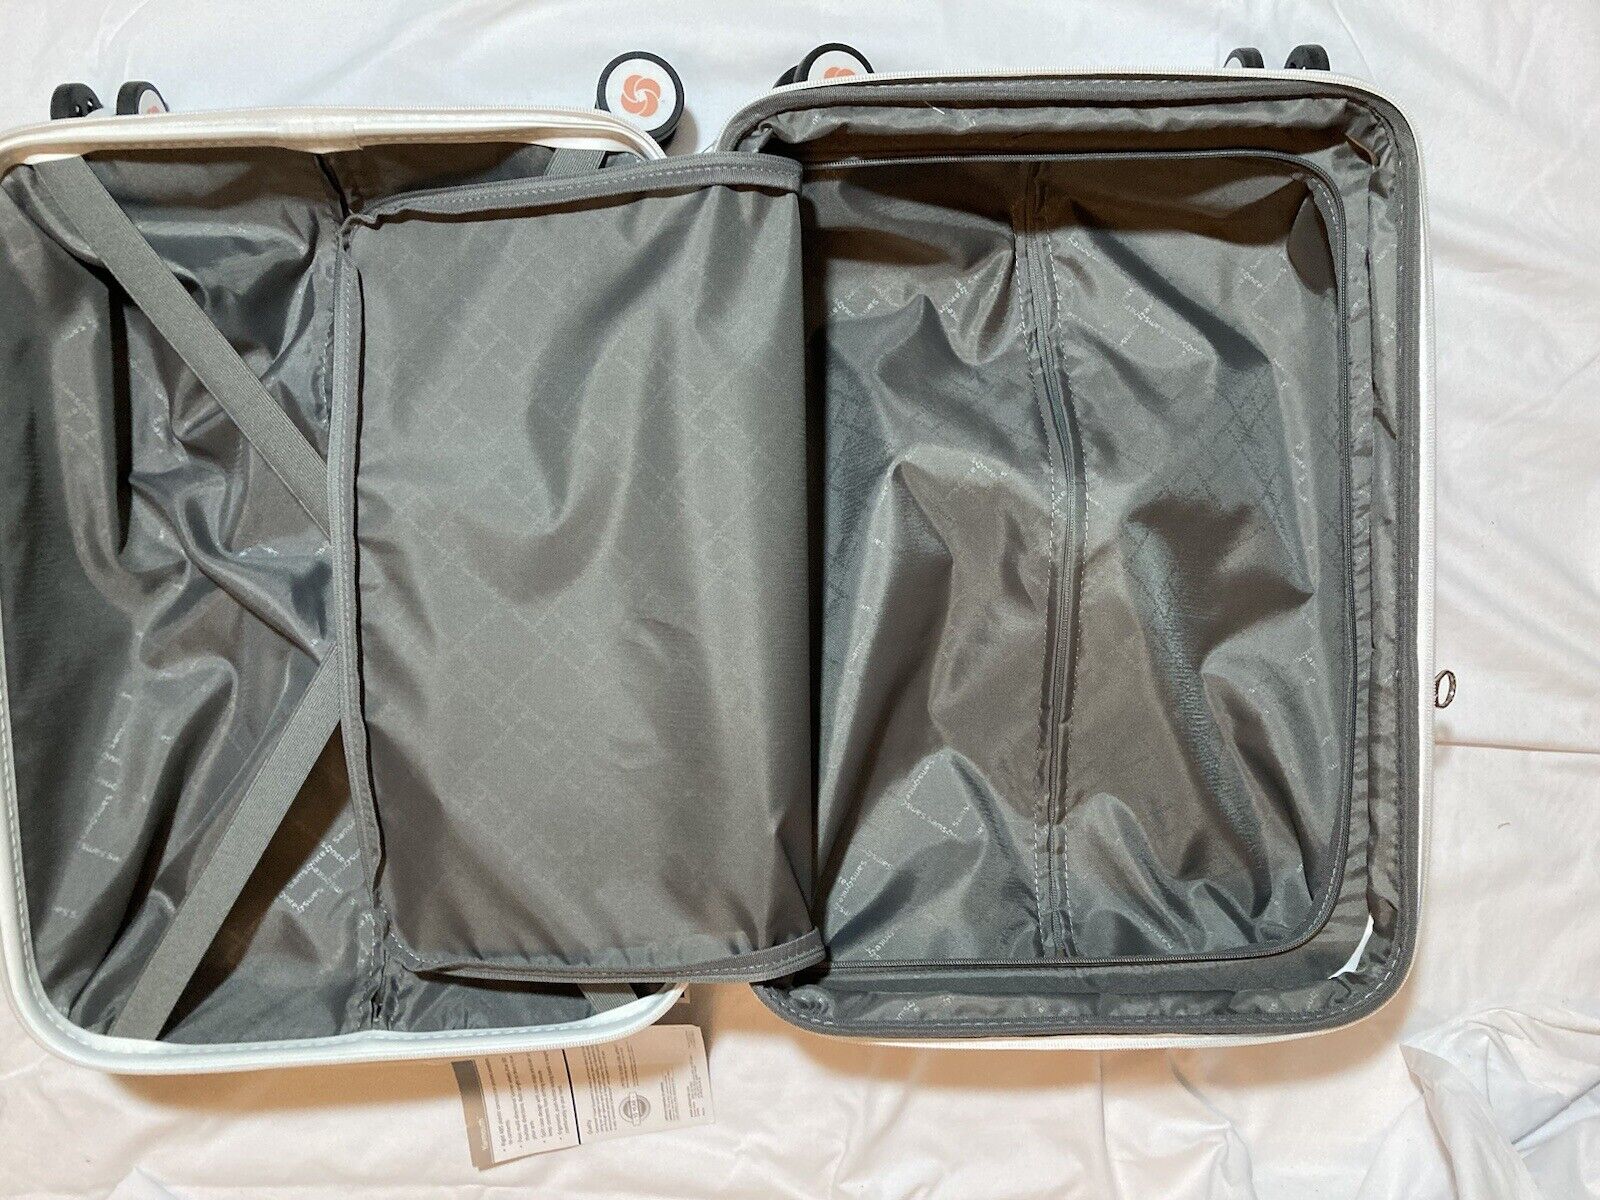 NWT 20" Samsonite Yarmouth Luggage Hard Shell Suitcase Spinner Blush/ Rose Gold - Picture 5 of 17